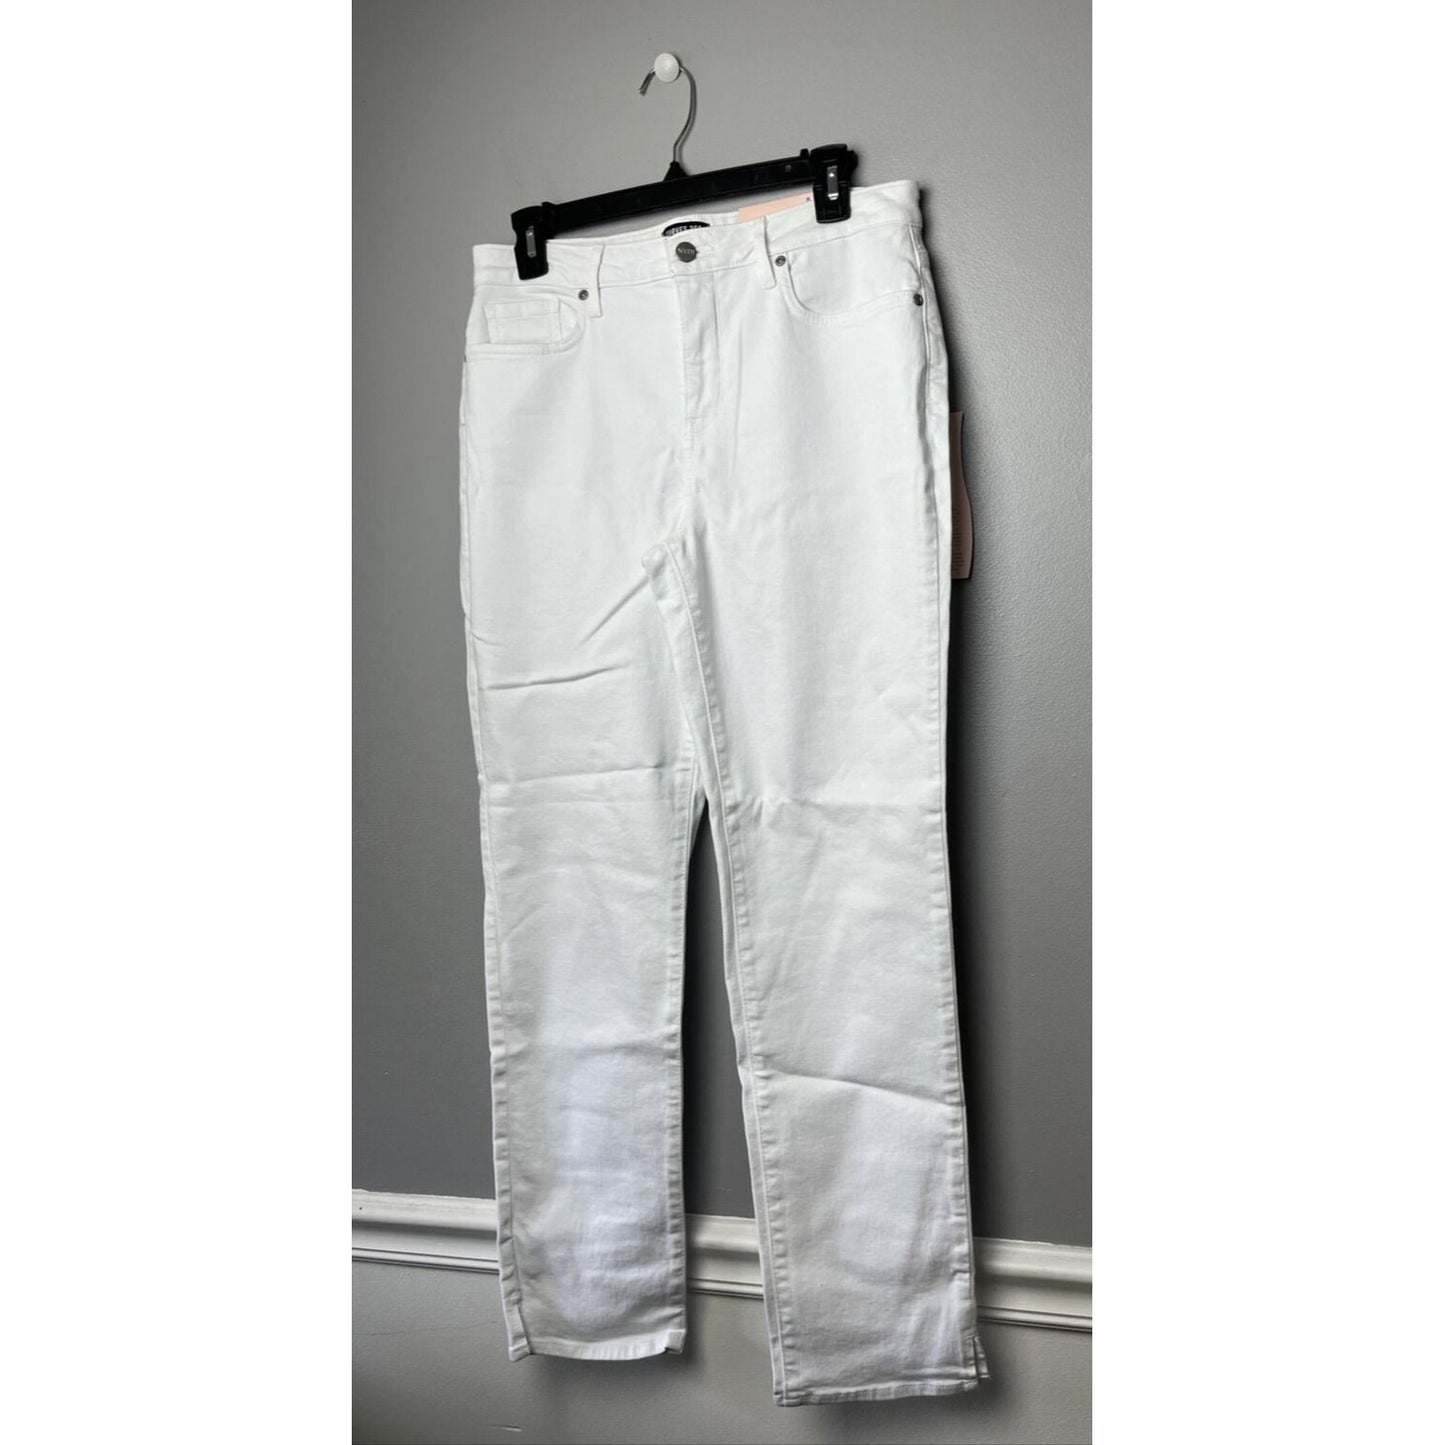 Curves 360 by NYDJ Slim Straight Ankle Jeans w/Side Slits NWT White Size 8